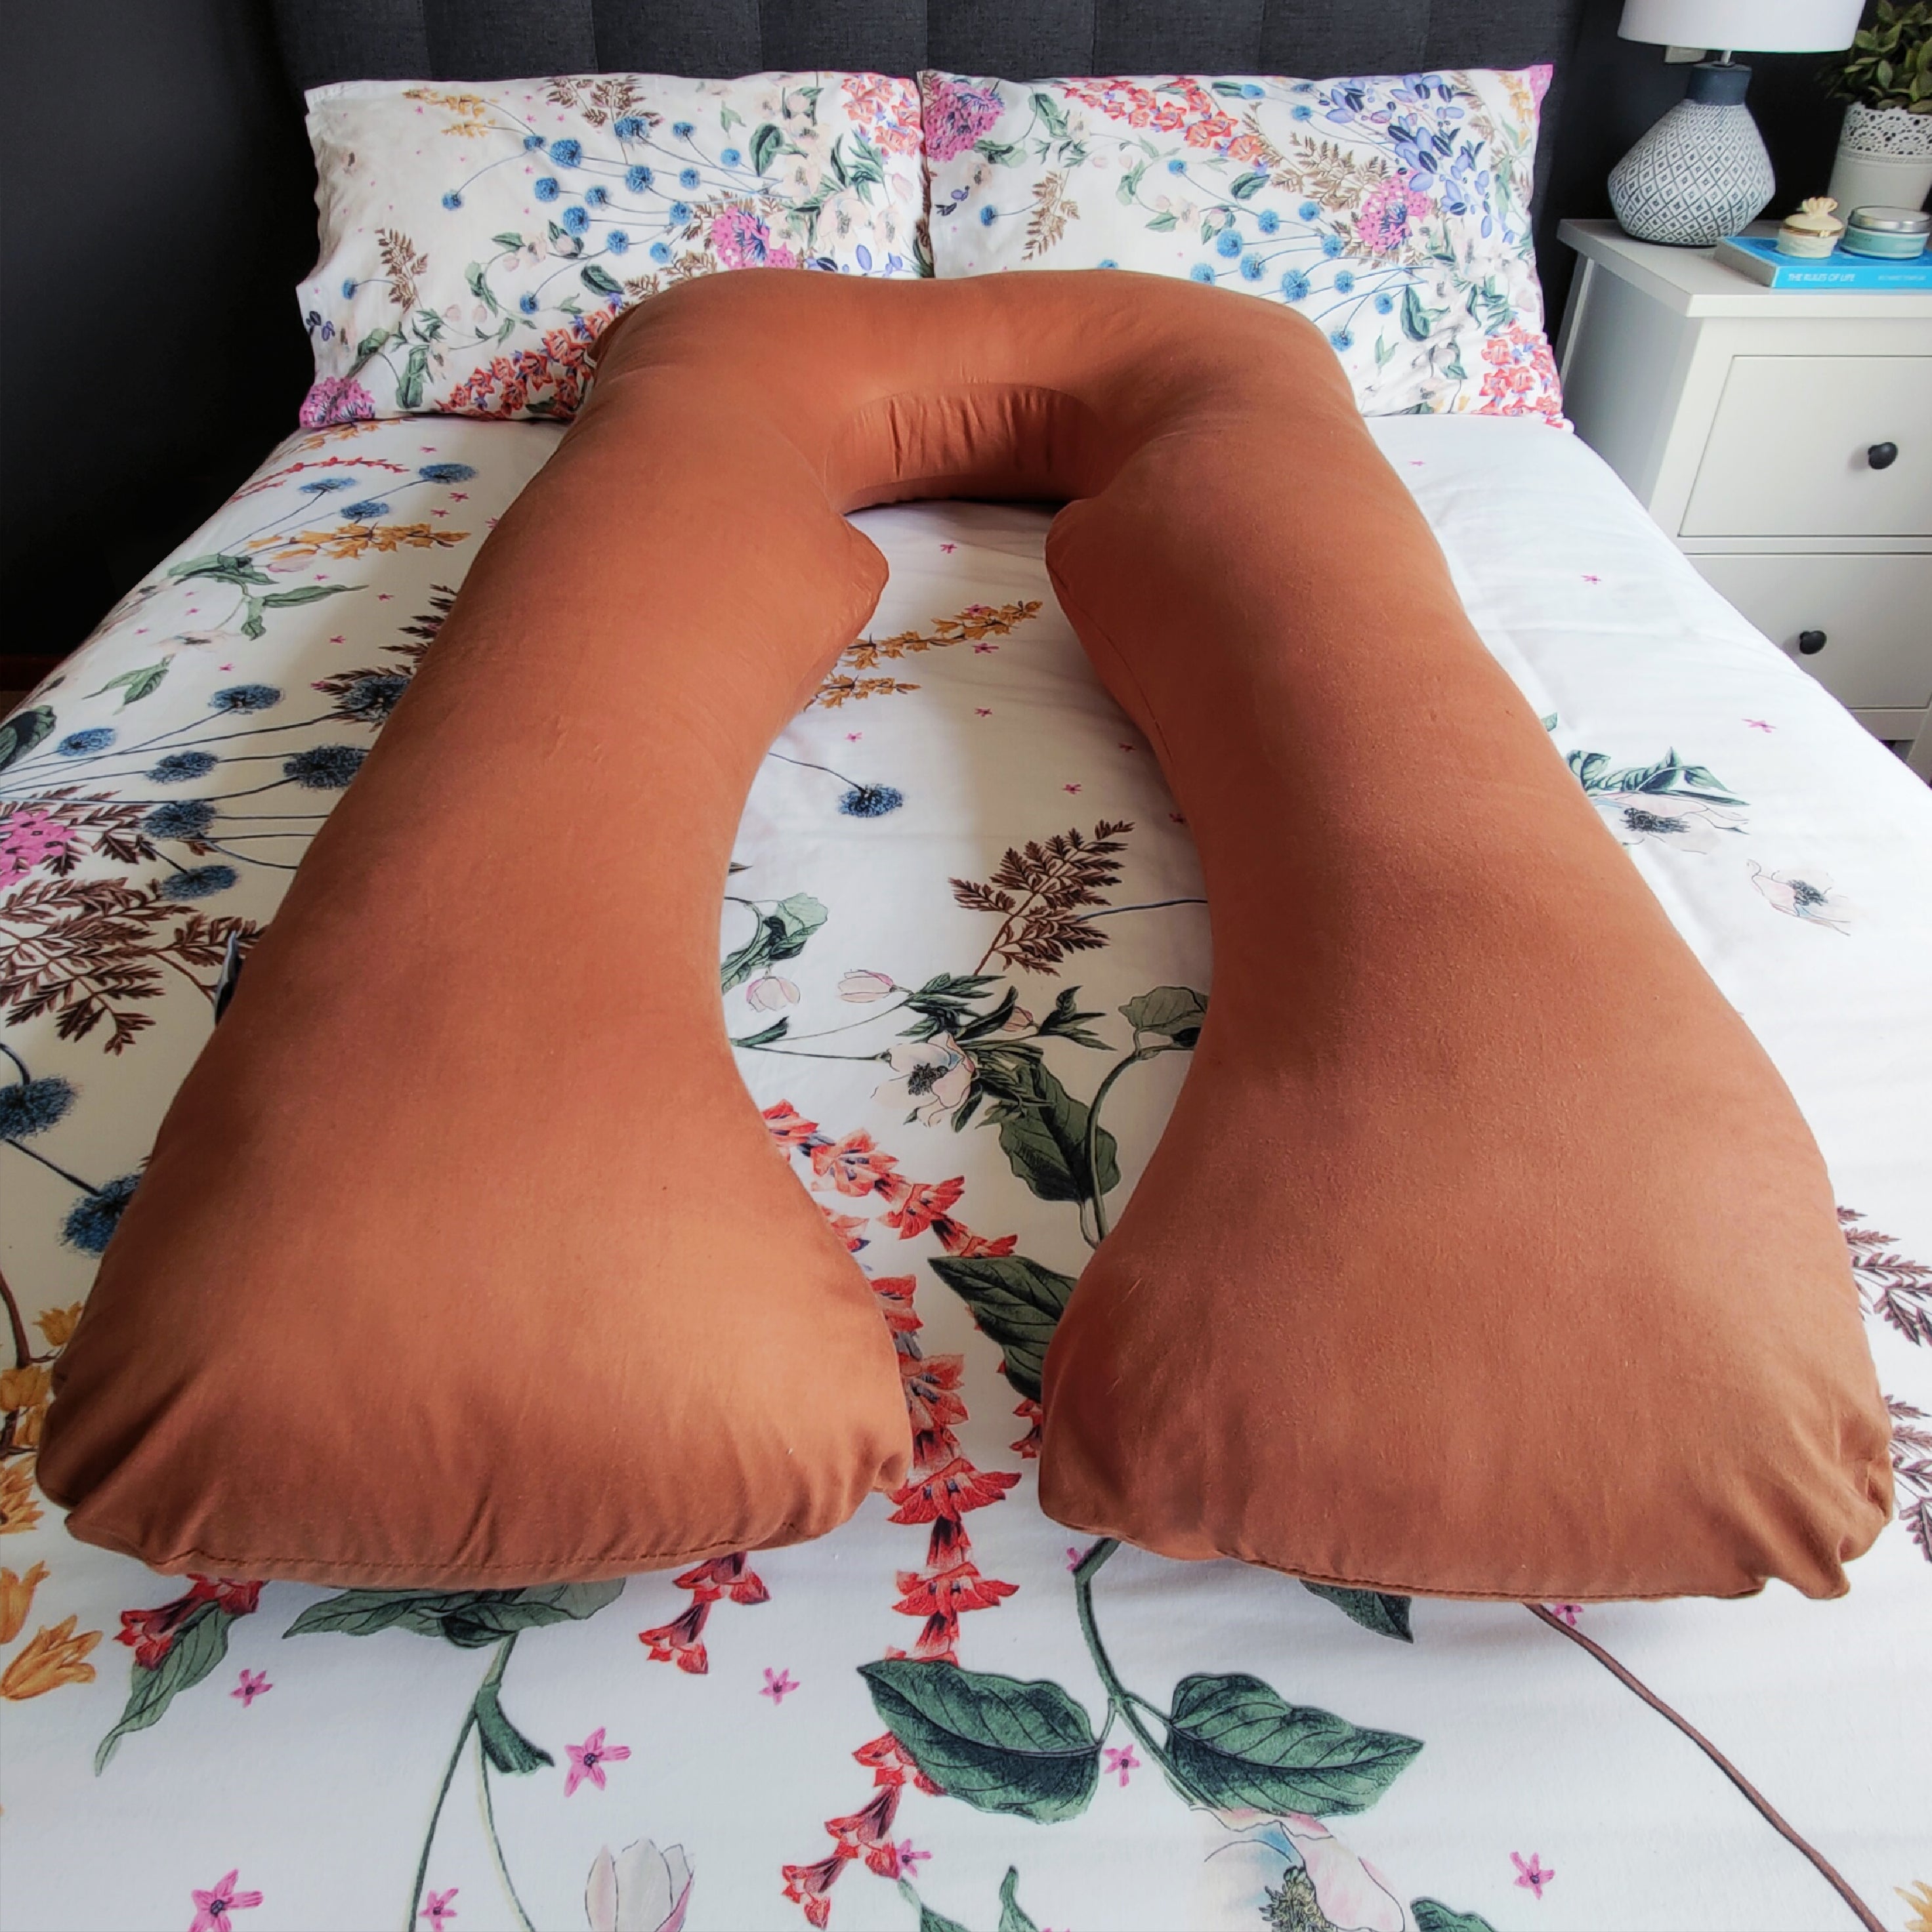 Chocolate Pillow Pod Full Body Support Pillow on Bed, with Flowery Bed Spread